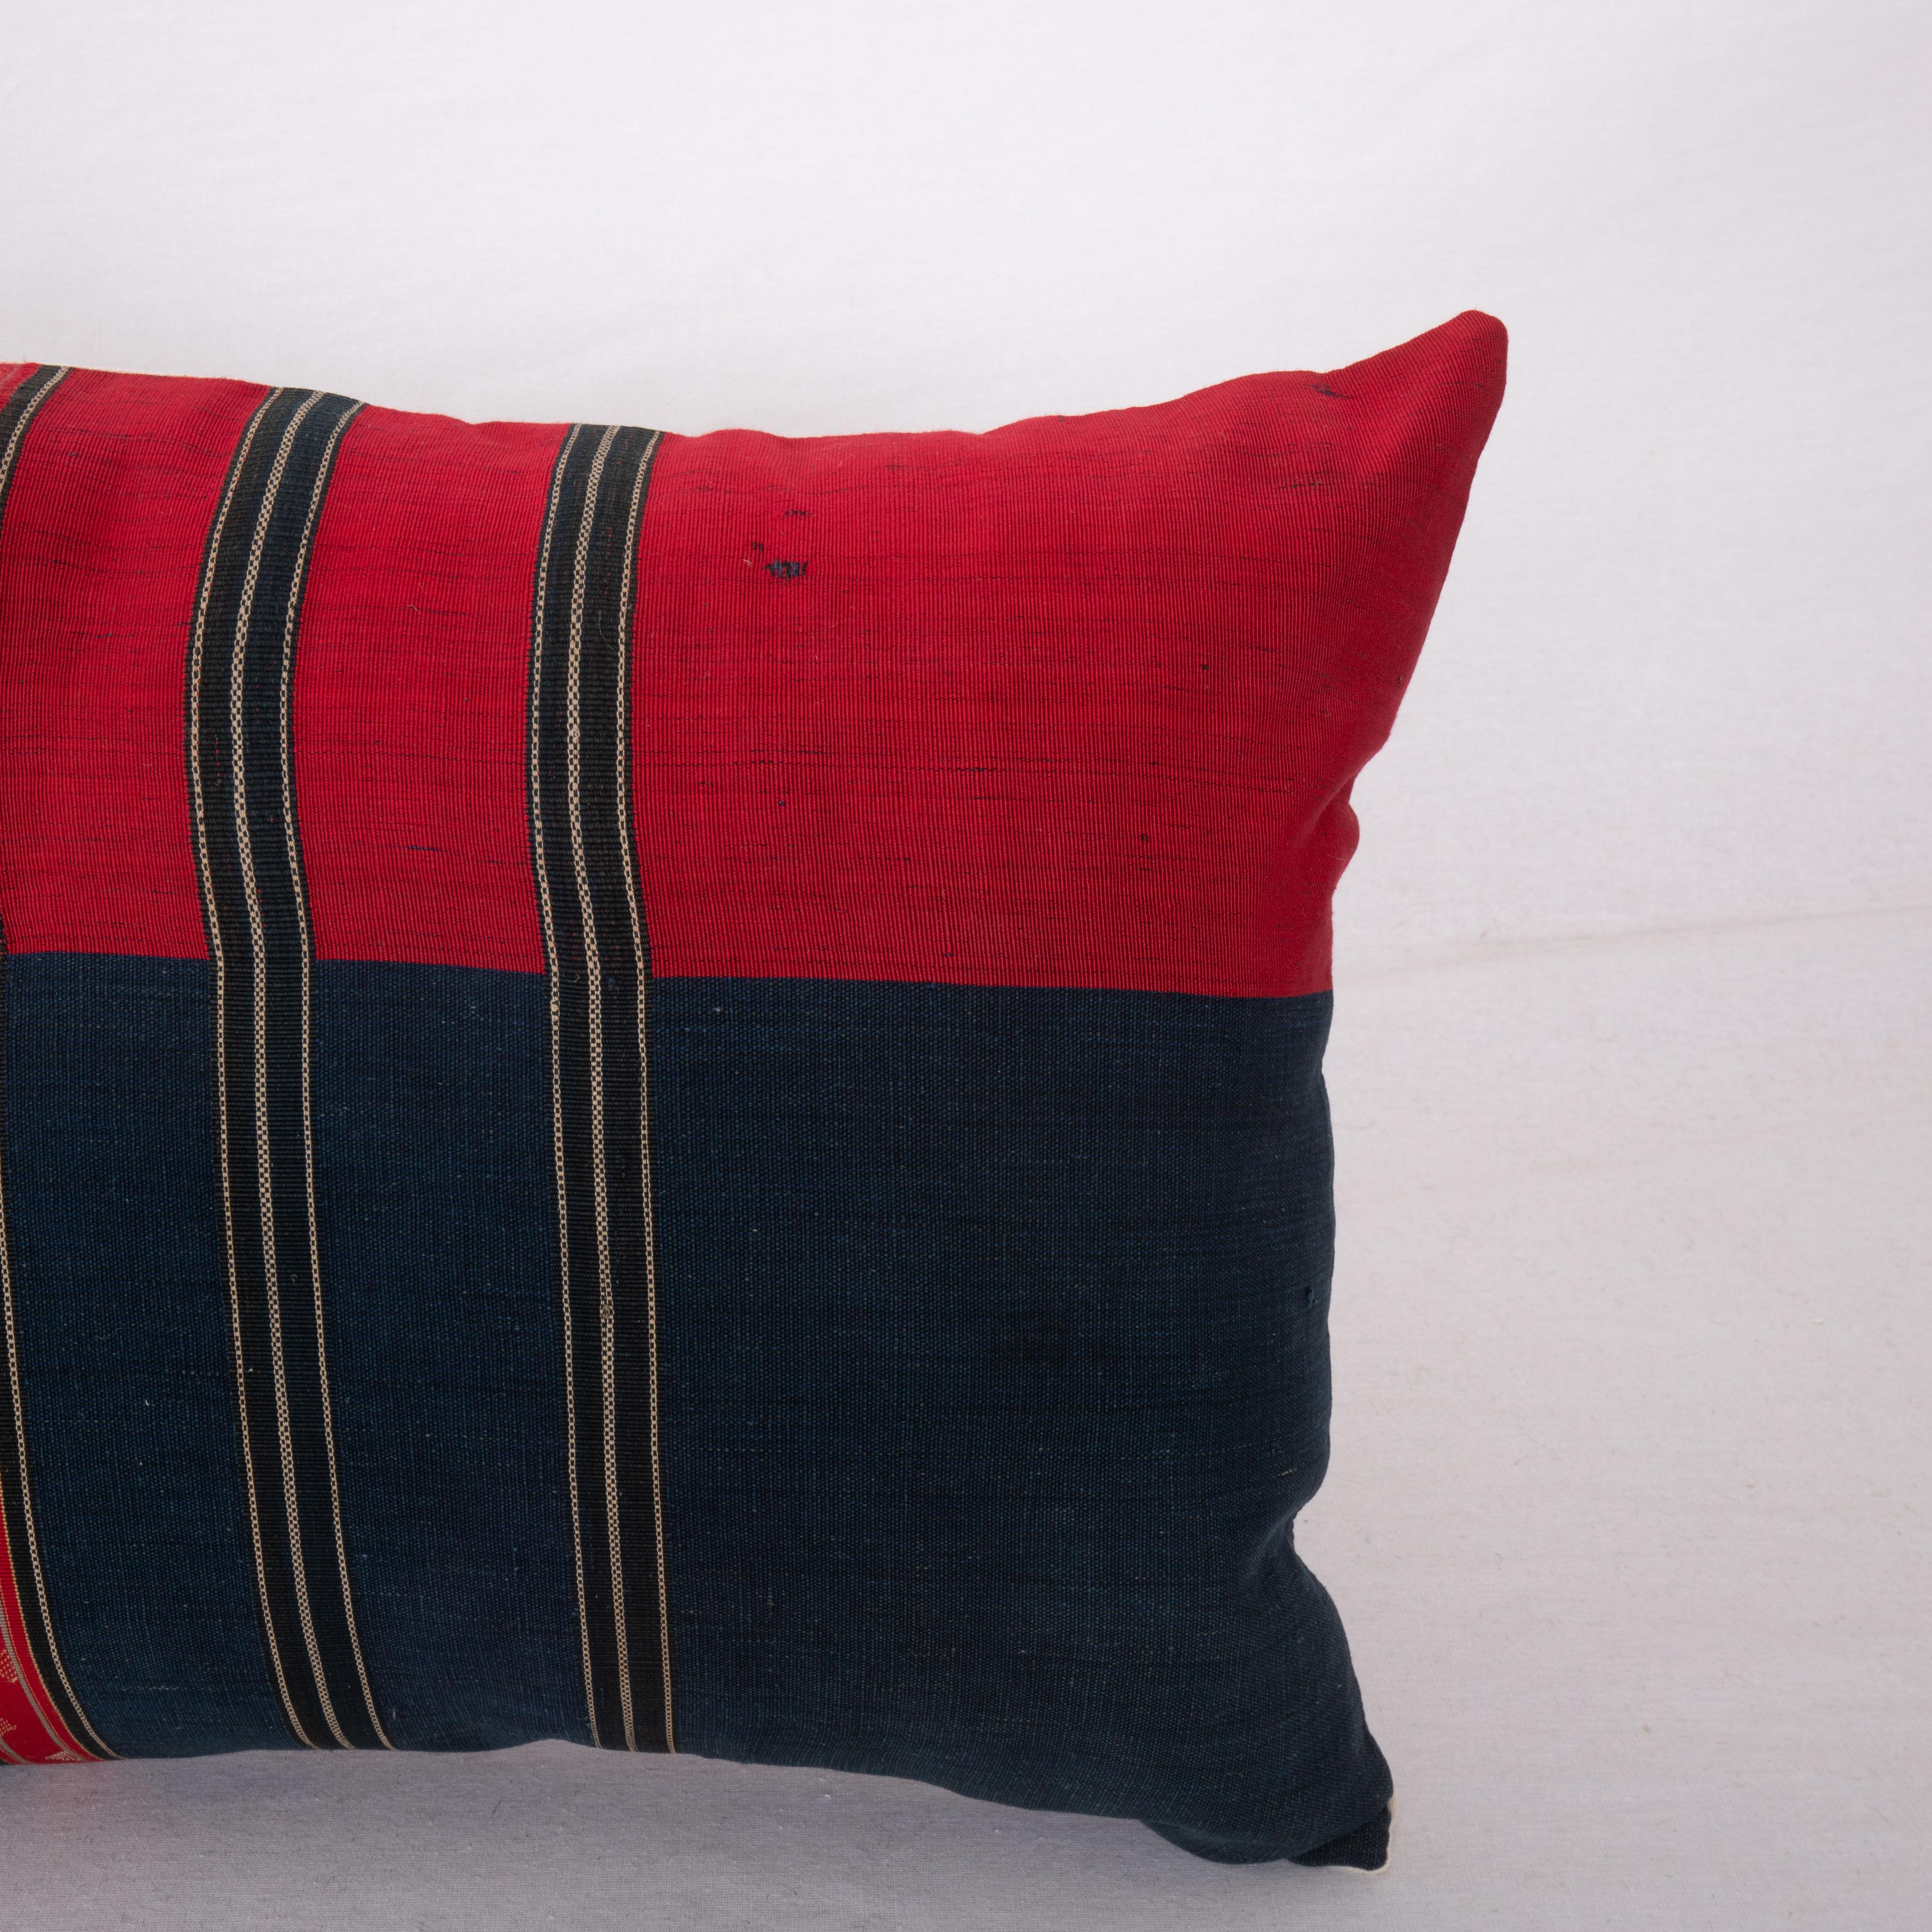 Hand-Woven Antique Silk and Cotton Waziri Shawl Pillow Cover, Afghanistan, Early 20th C